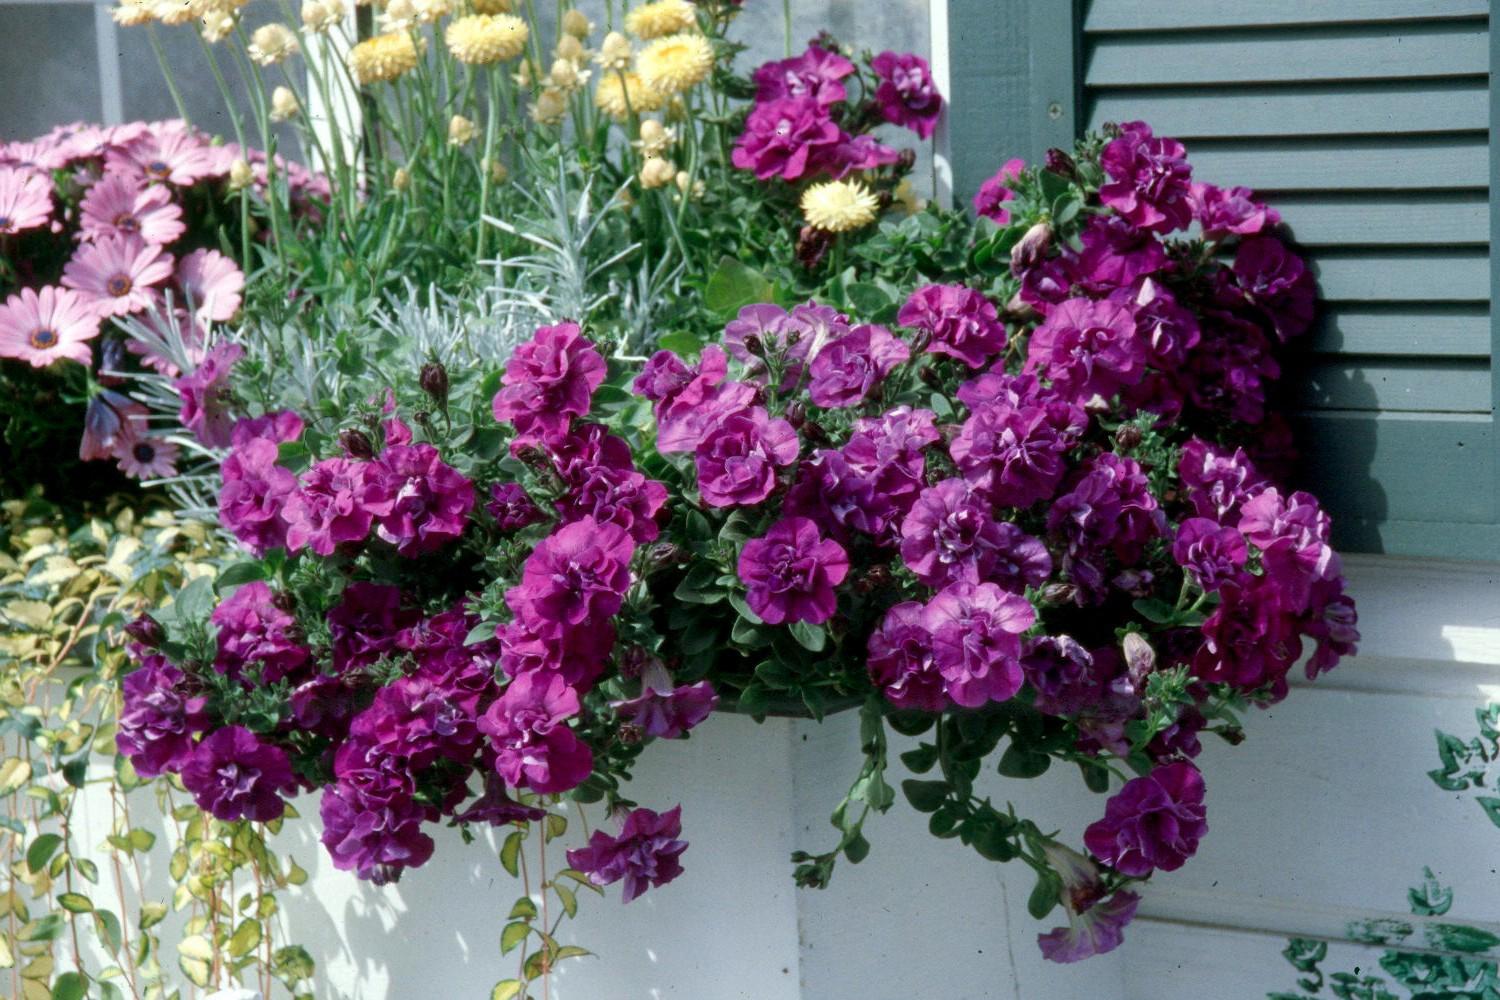 Marco Polo double petunias, variegated vinca, silver helichrysum and straw flowers make for an award-winning window-box planting. (large photo)